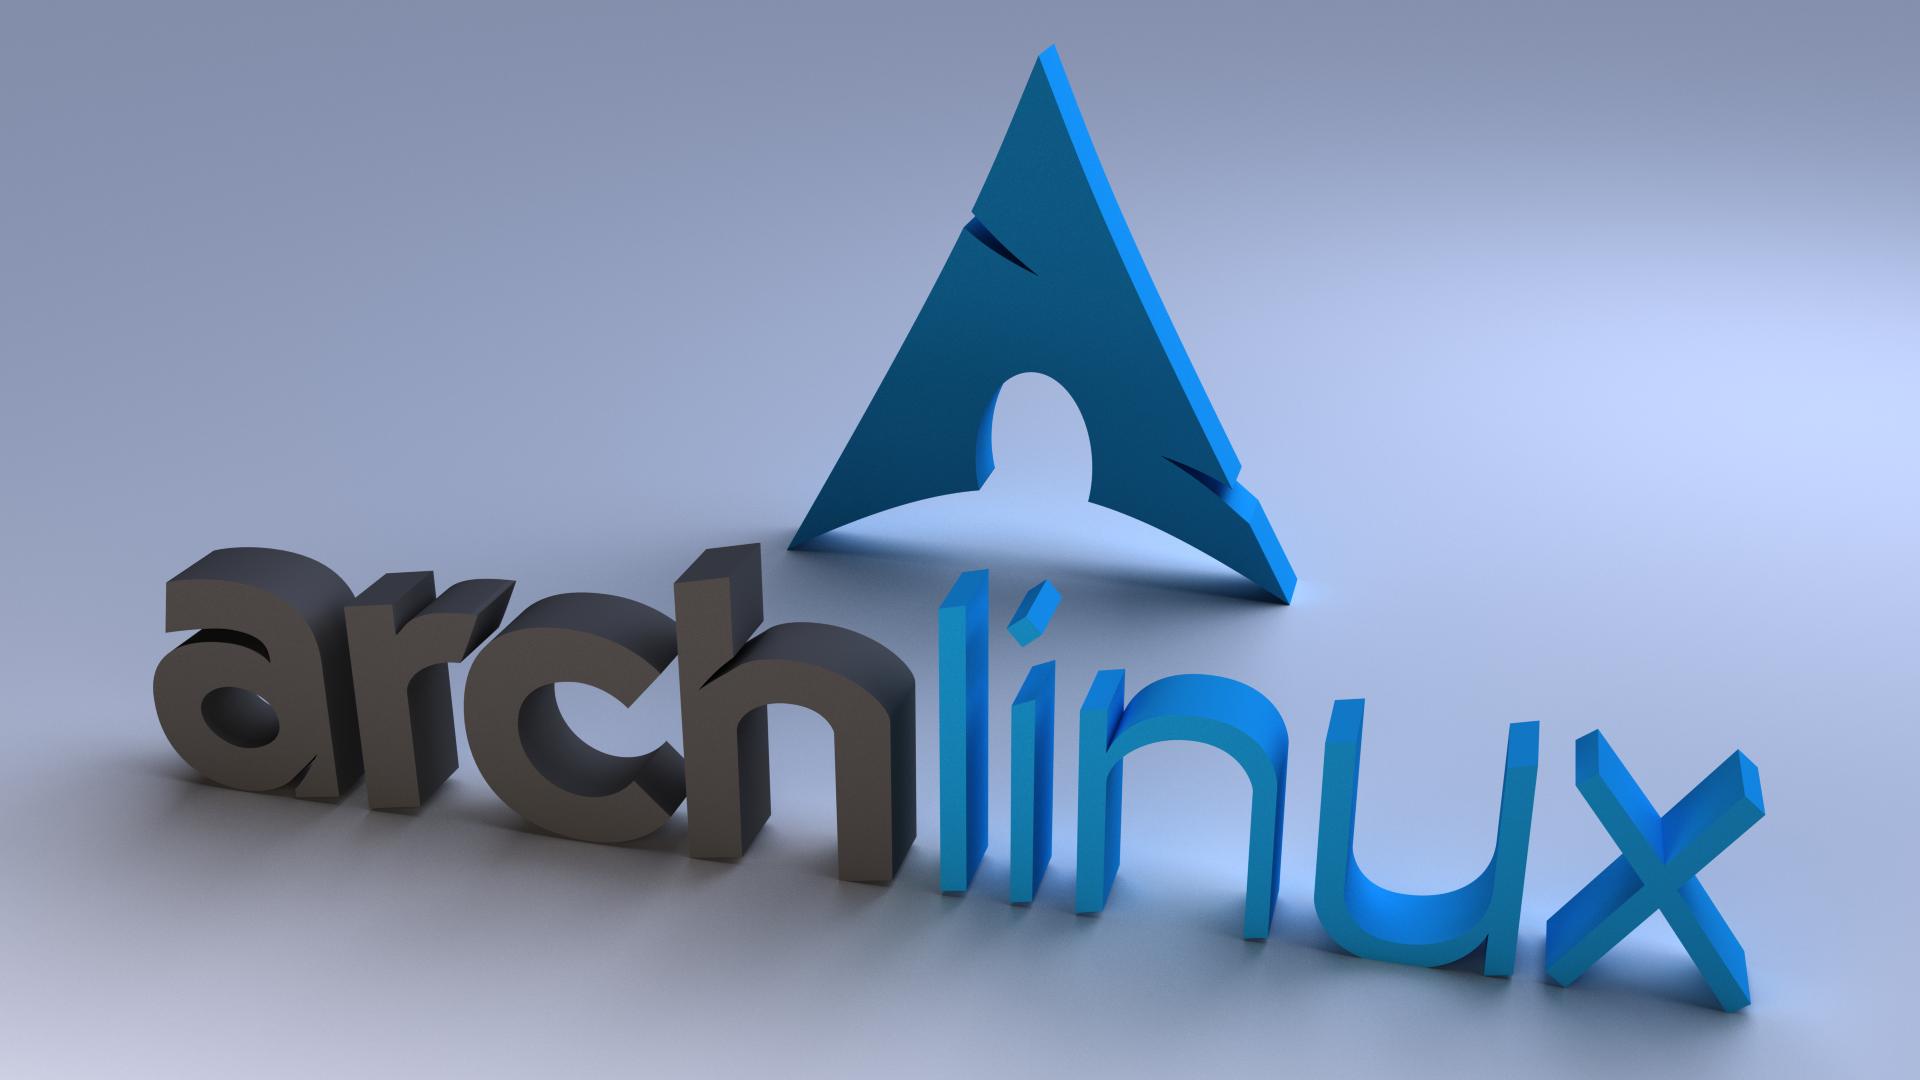 Arch Linux 3D Wallpaper I made in Blender with Cycles